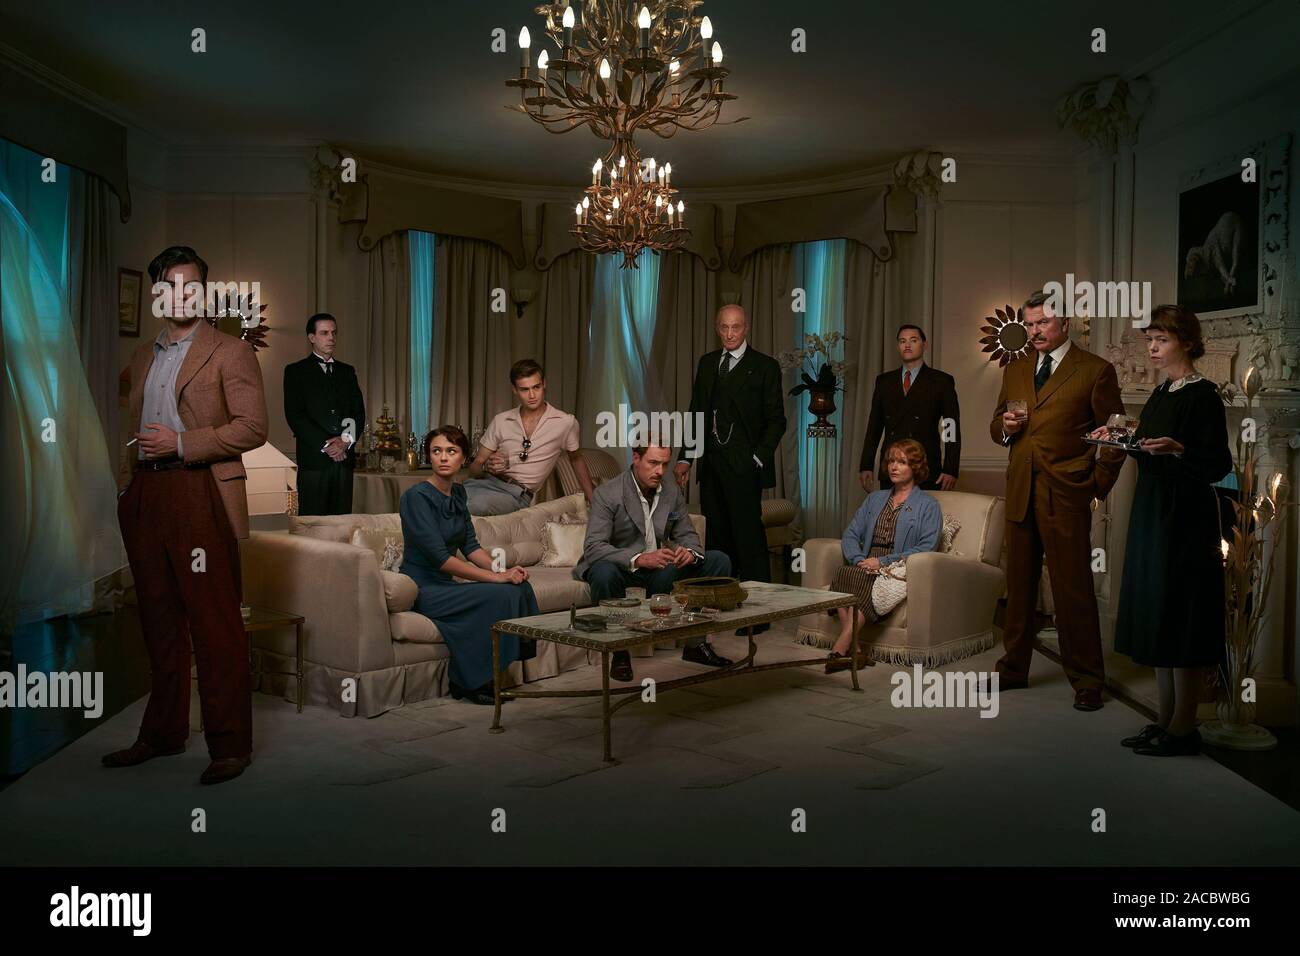 CHARLES DANCE, MIRANDA RICHARDSON, SAM NEILL, NOAH TAYLOR, TOBY STEPHENS, DOUGLAS BOOTH, AIDAN TURNER, ANNA MAXWELL MARTIN, BURN GORMAN and MAEVE DERMODY in AND THEN THERE WERE NONE (2015), directed by CRAIG VIVEIROS. Credit: MAMMOTH SCREEN / Album Stock Photo